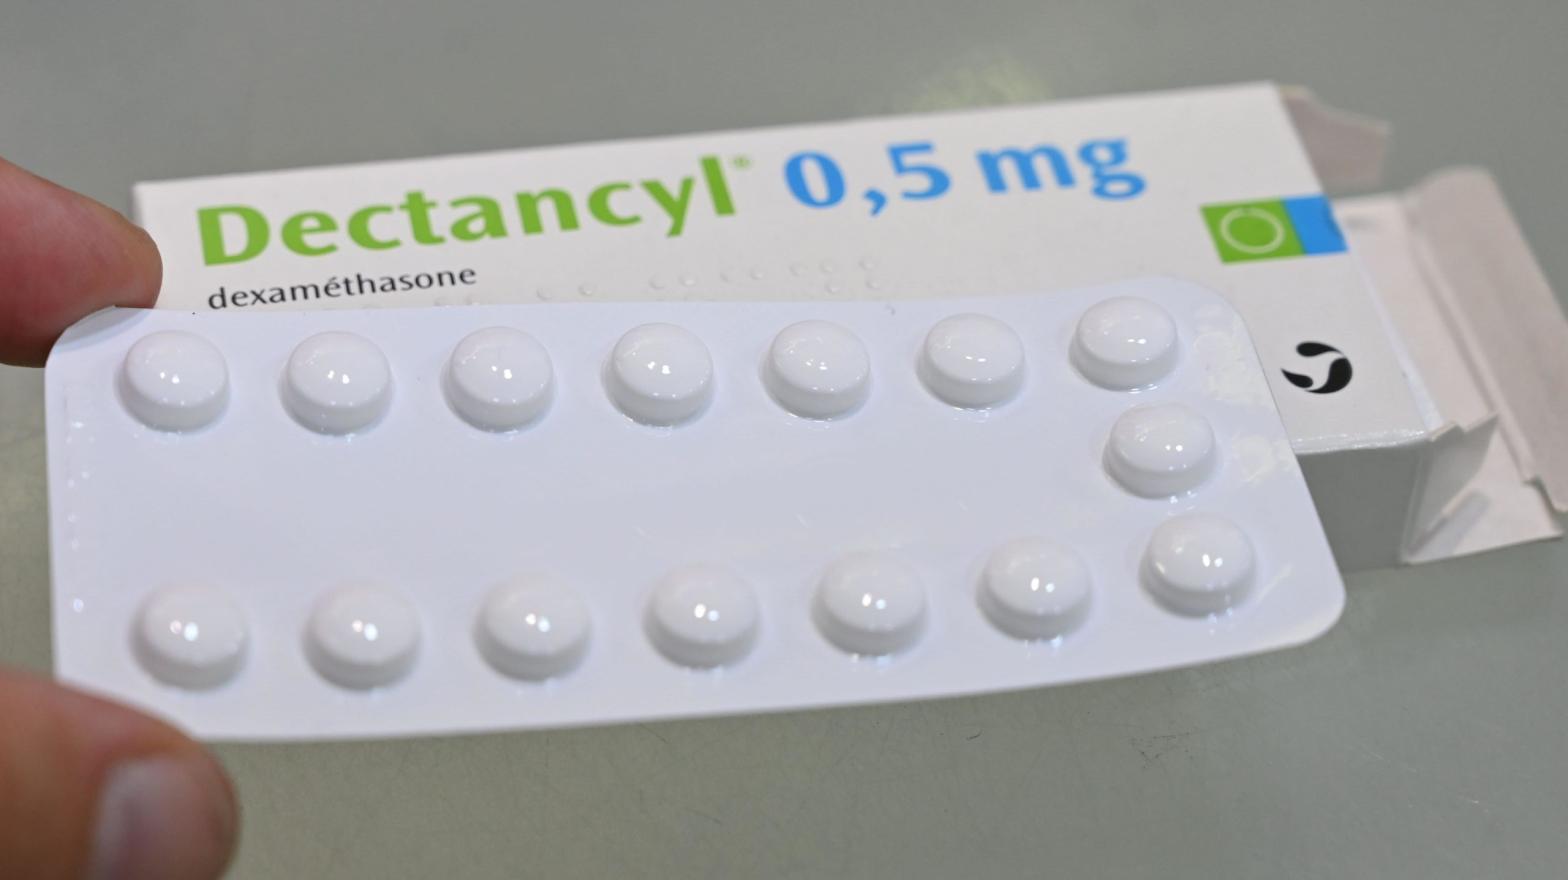 A picture taken on June 16, 2020 in Paris shows tablets of Dectancyl, a drug manufactured by Sanofi containing dexamethasone (Photo: Getty Images)